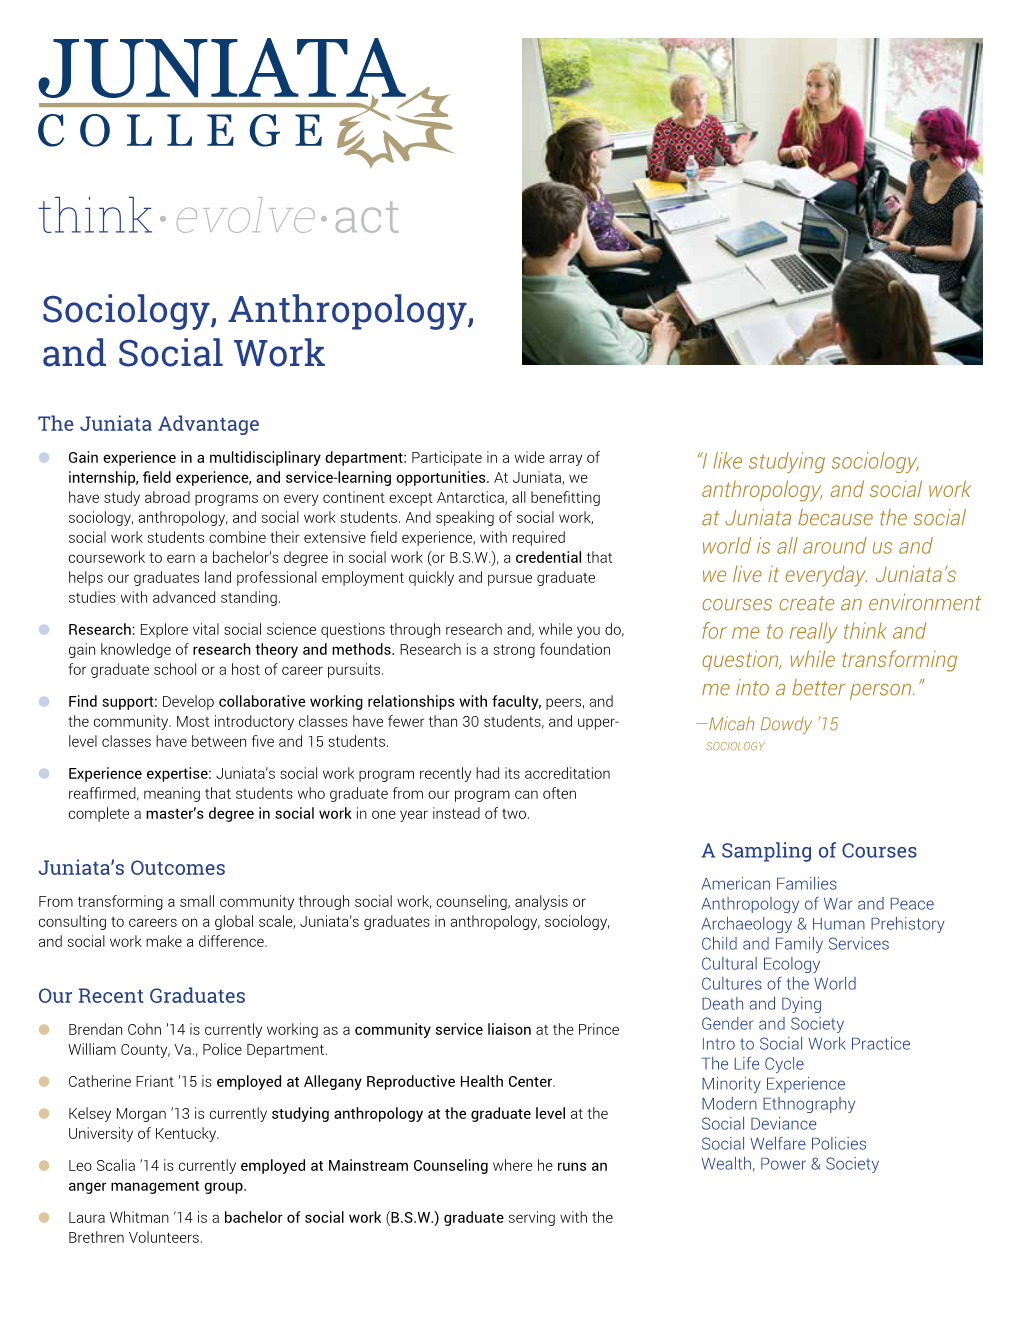 Sociology, Anthropology, and Social Work